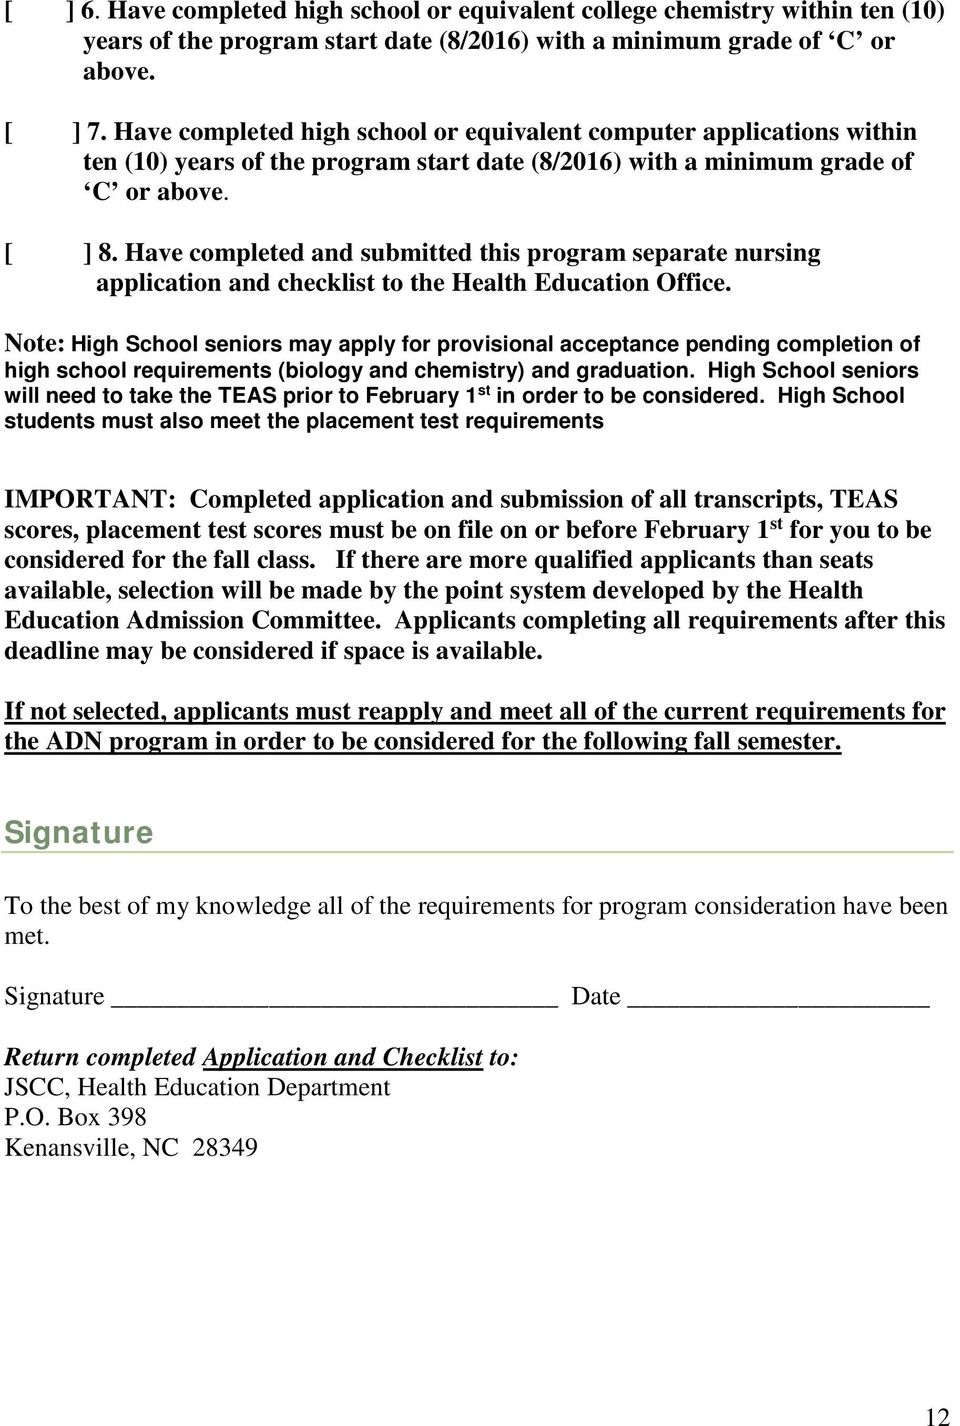 Have completed and submitted this program separate nursing application and checklist to the Health Education Office.